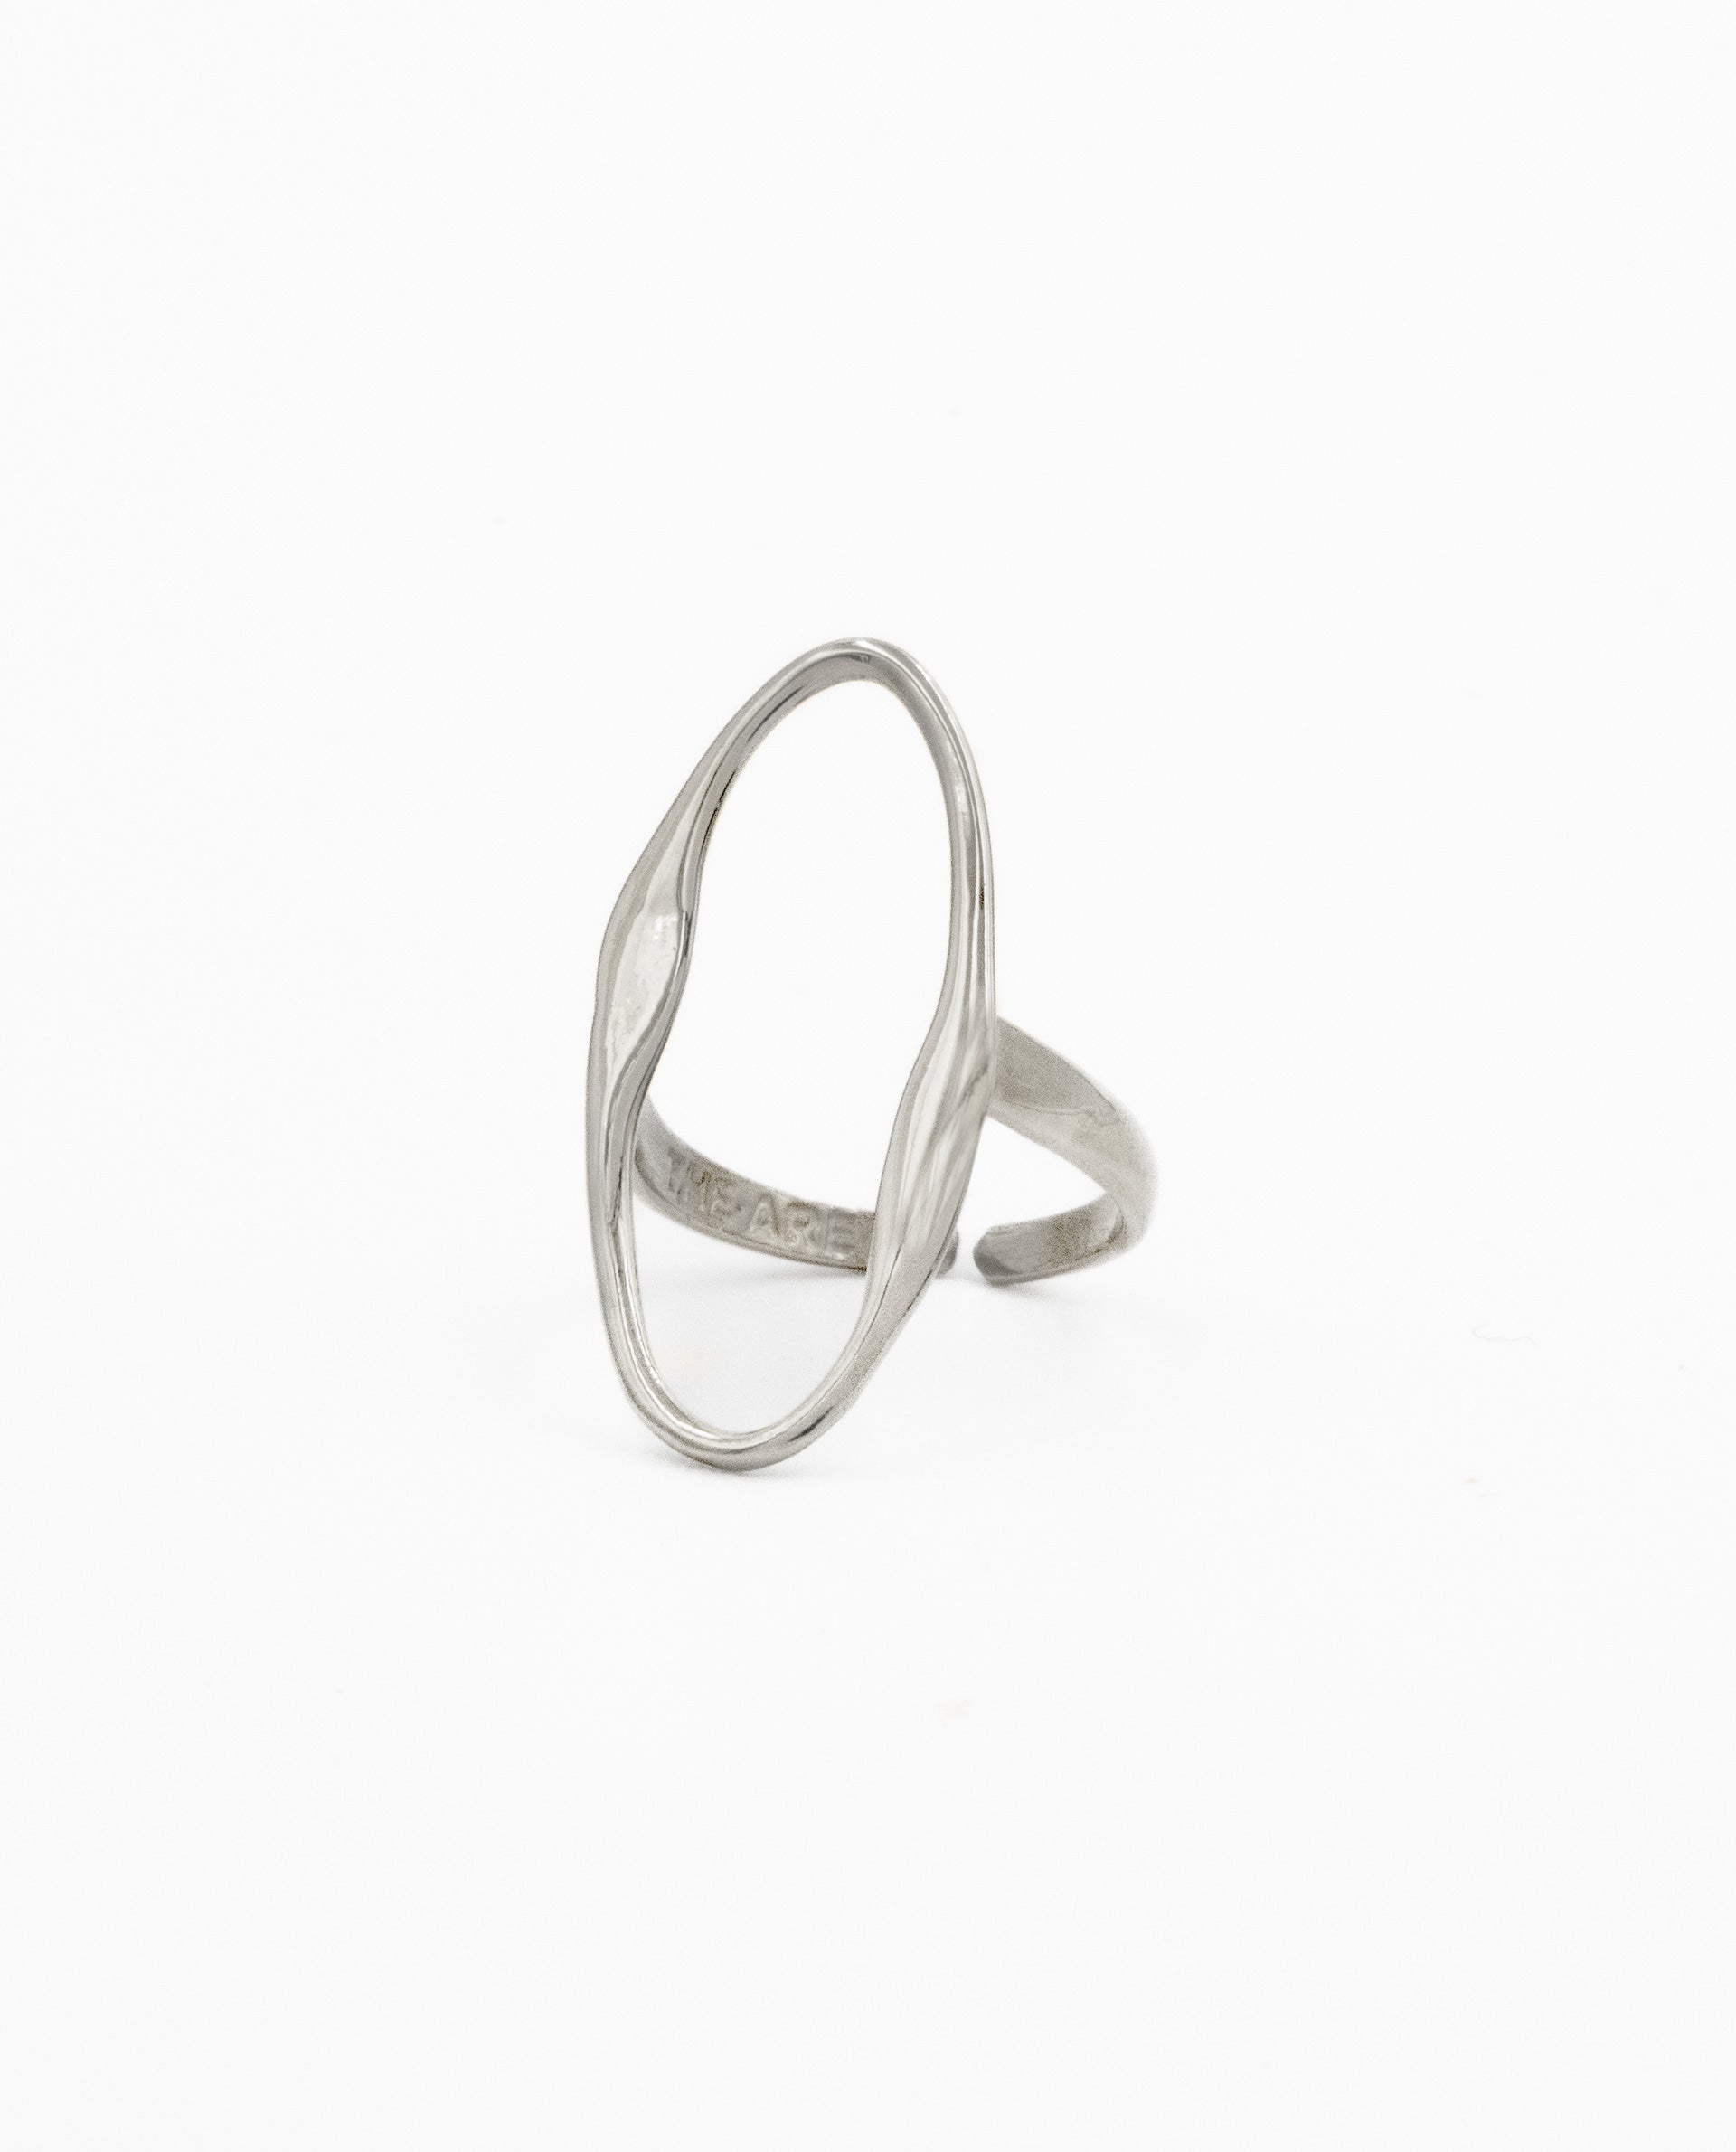 HALO RING - SILVER